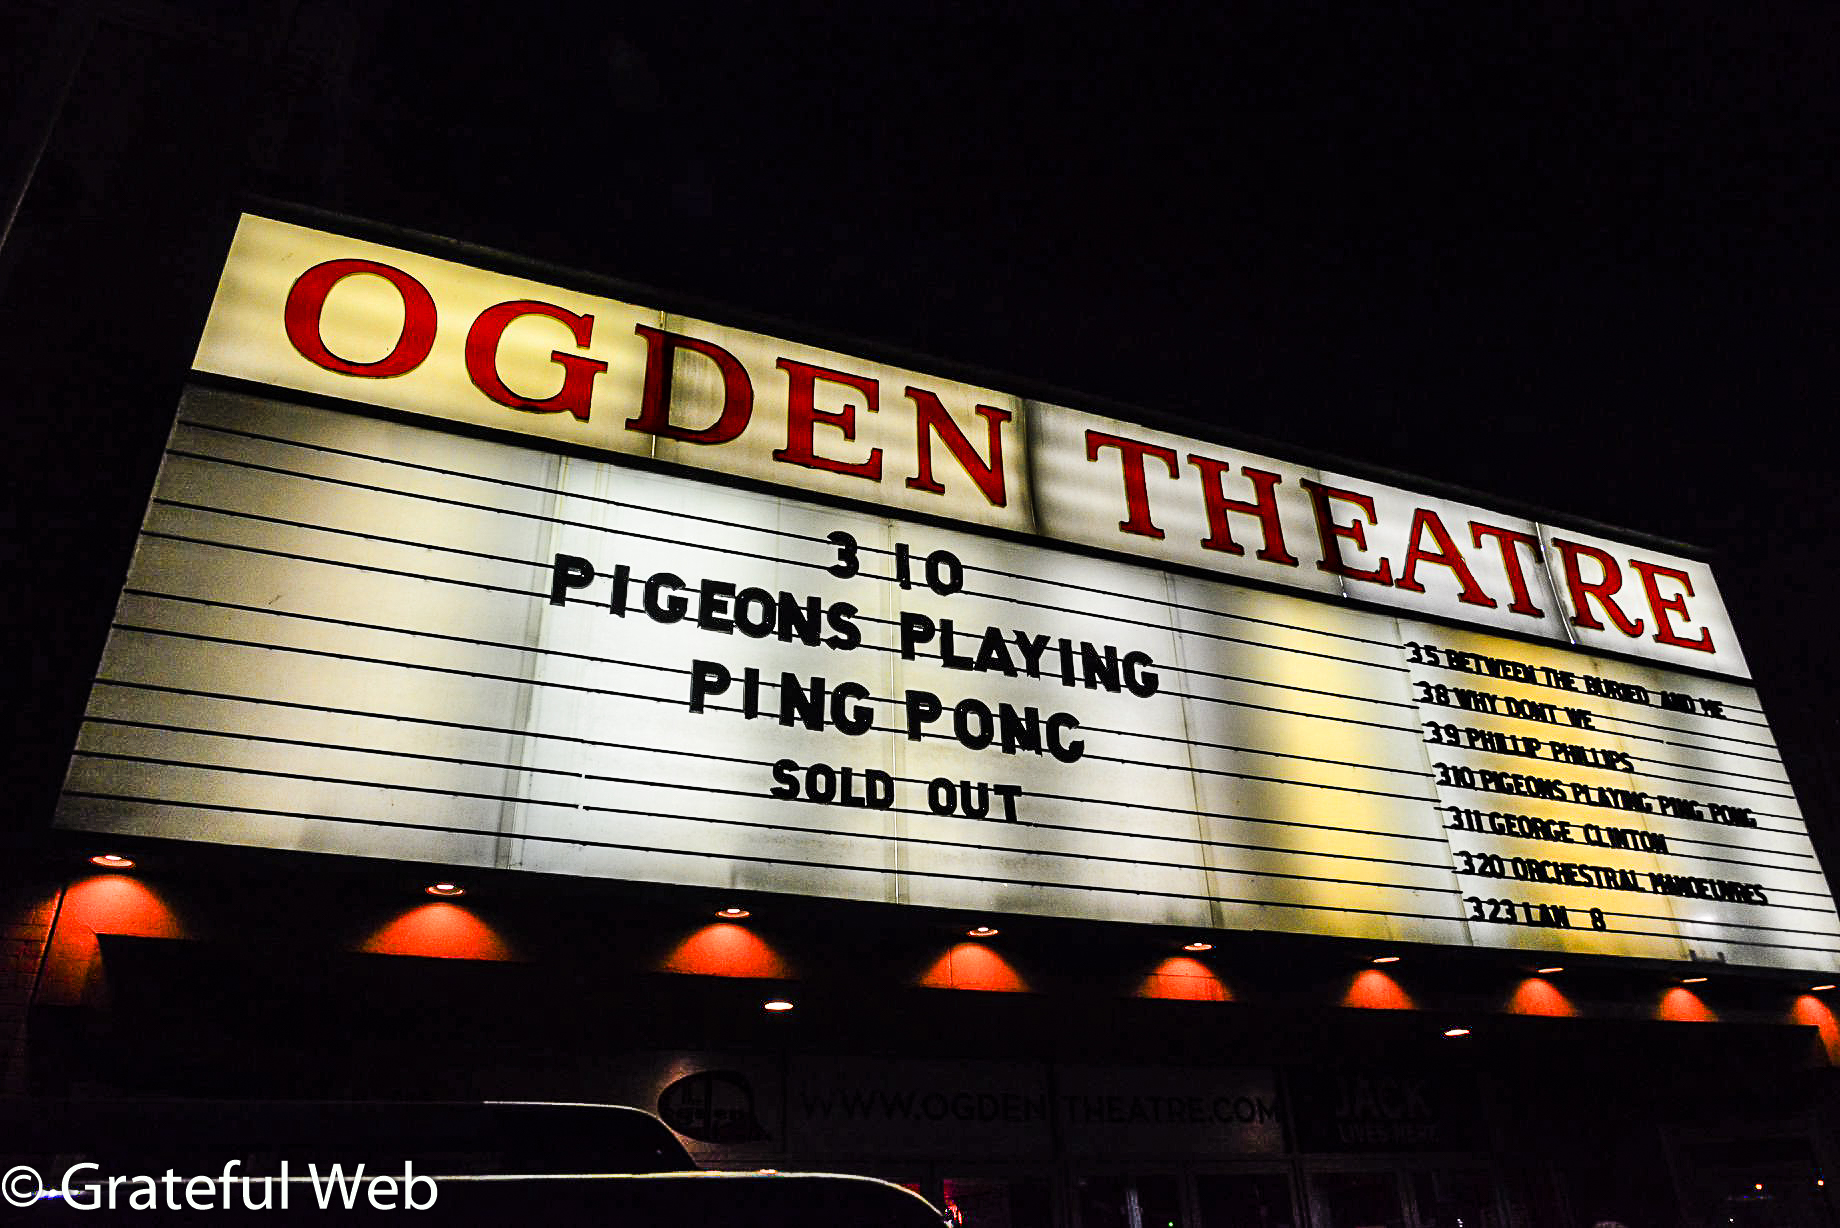 Pigeons Playing Ping Pong sold-out show in Denver!